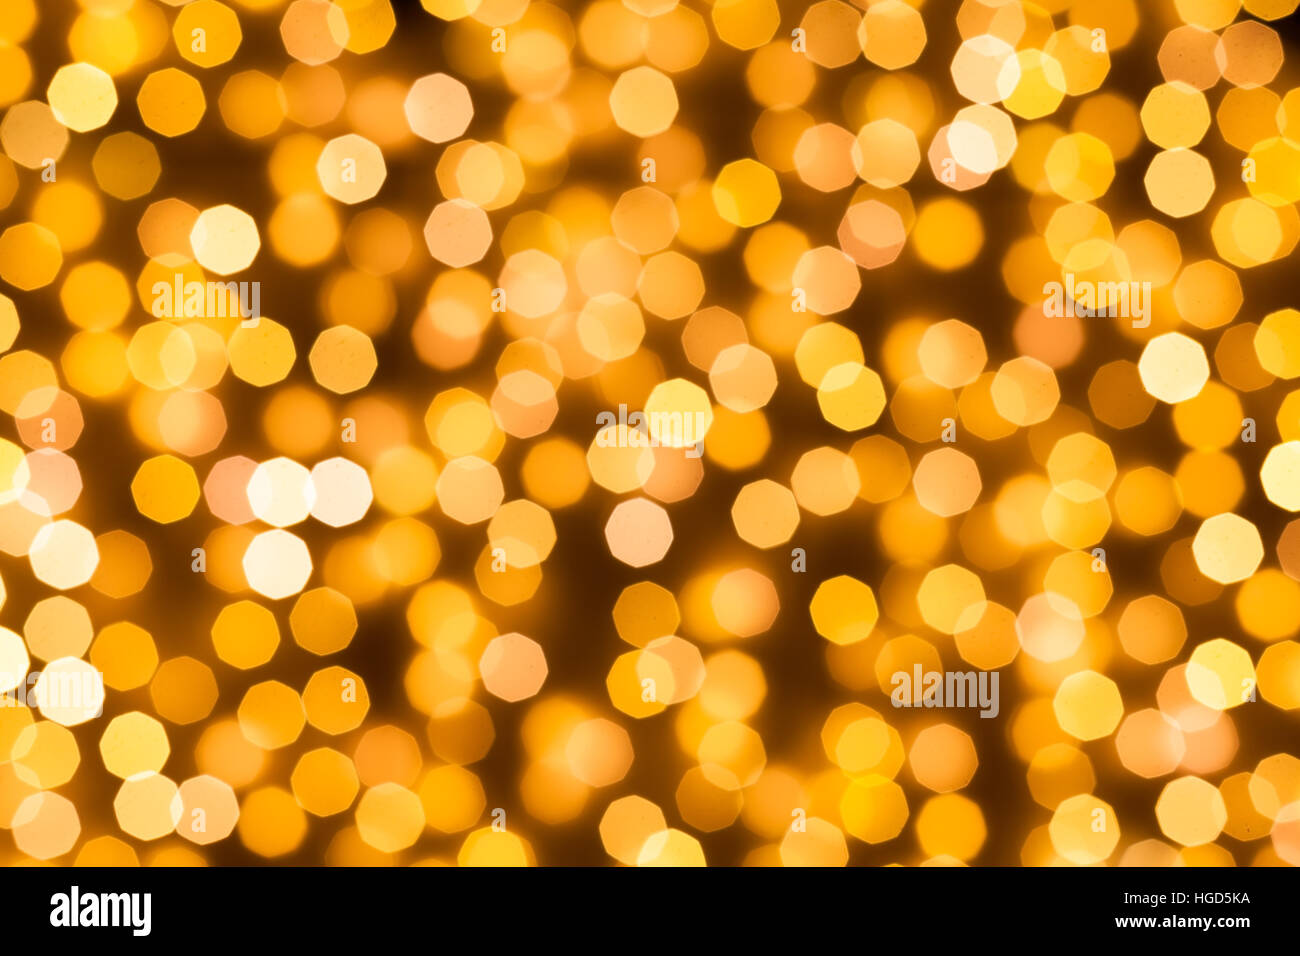 Blurred shining christmas lights decoration with warm white color to use as a background Stock Photo